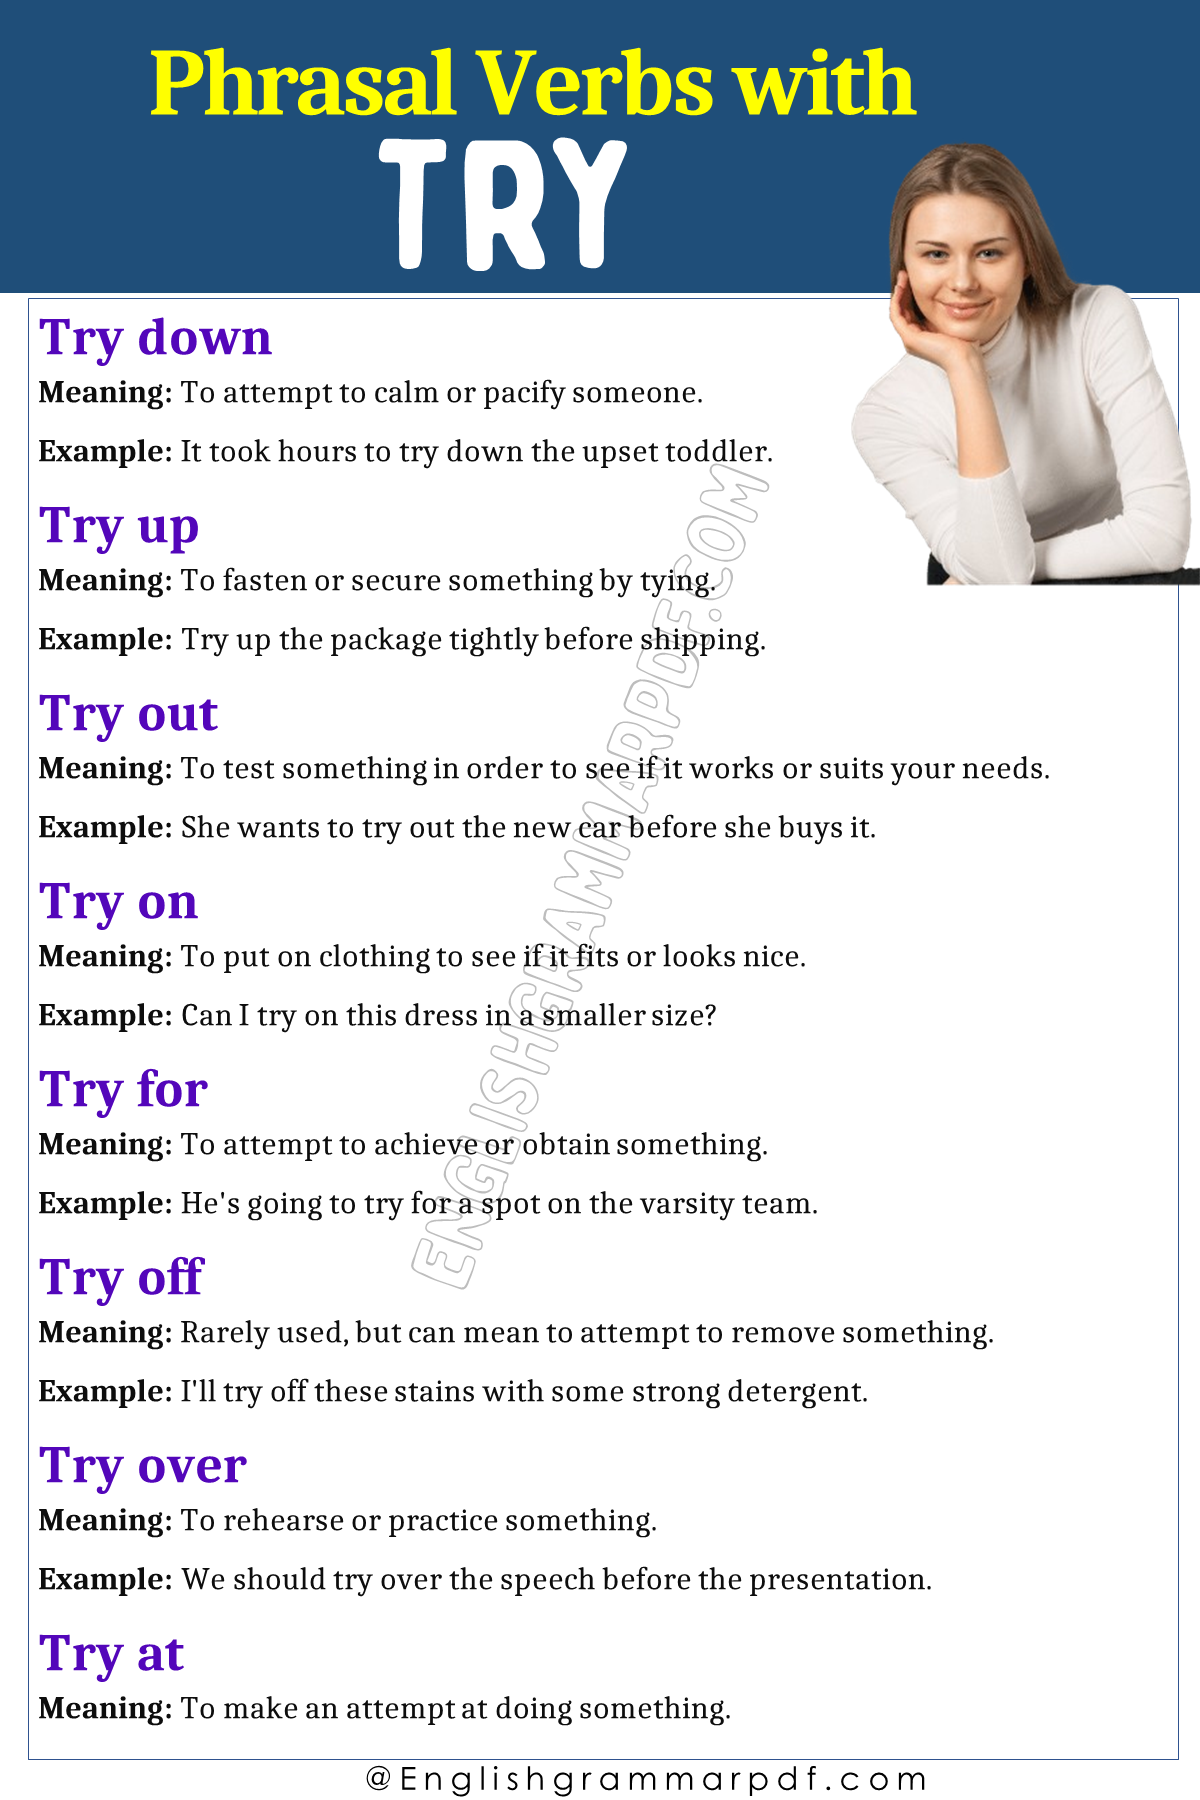 Phrasal Verbs with Try